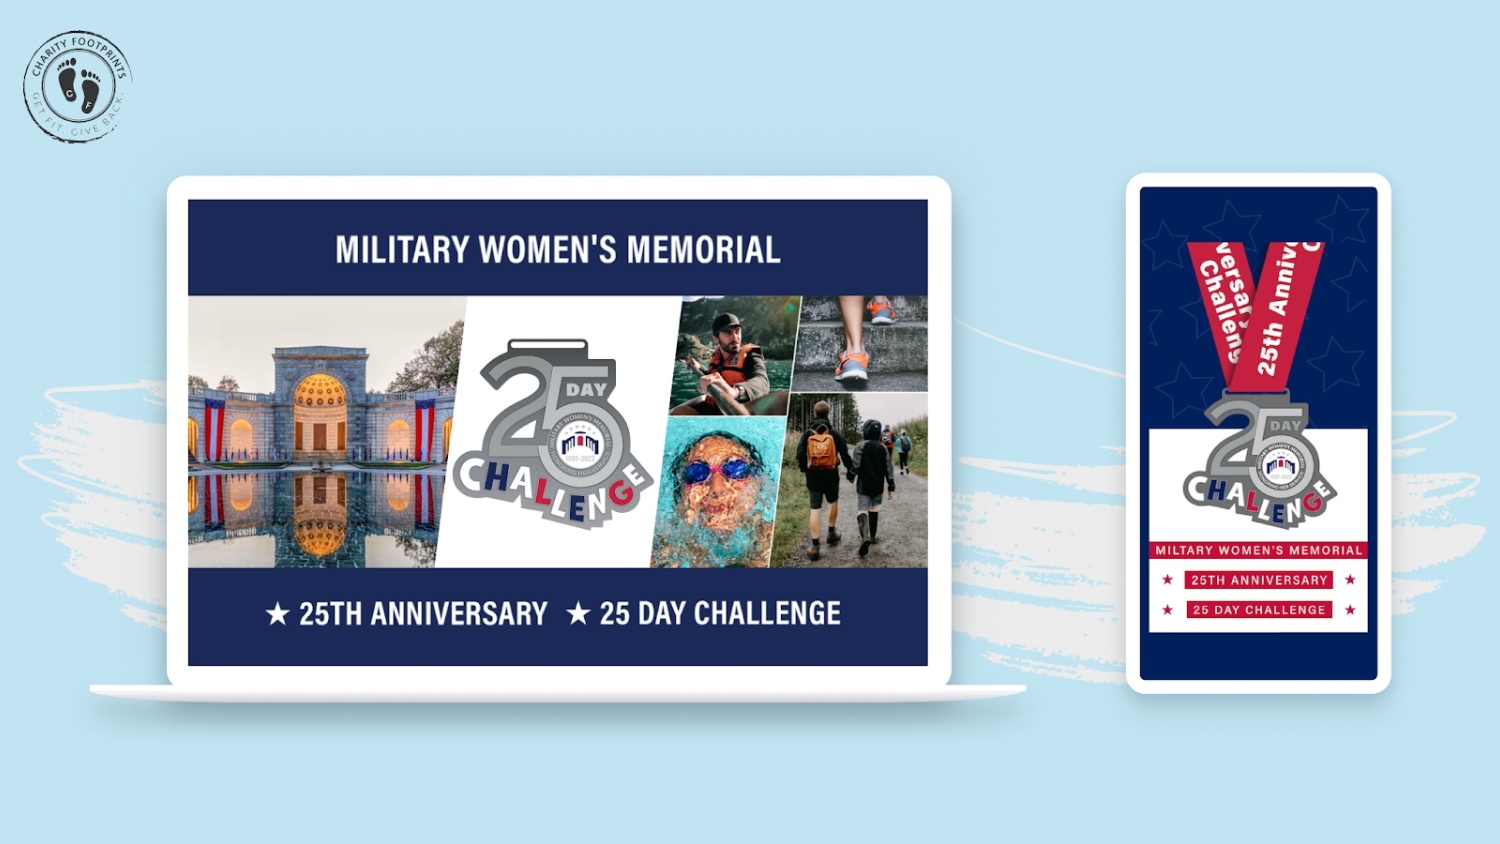 The Military Women's Memorial honors and tells the stories of women, past and present, who serve our nation.